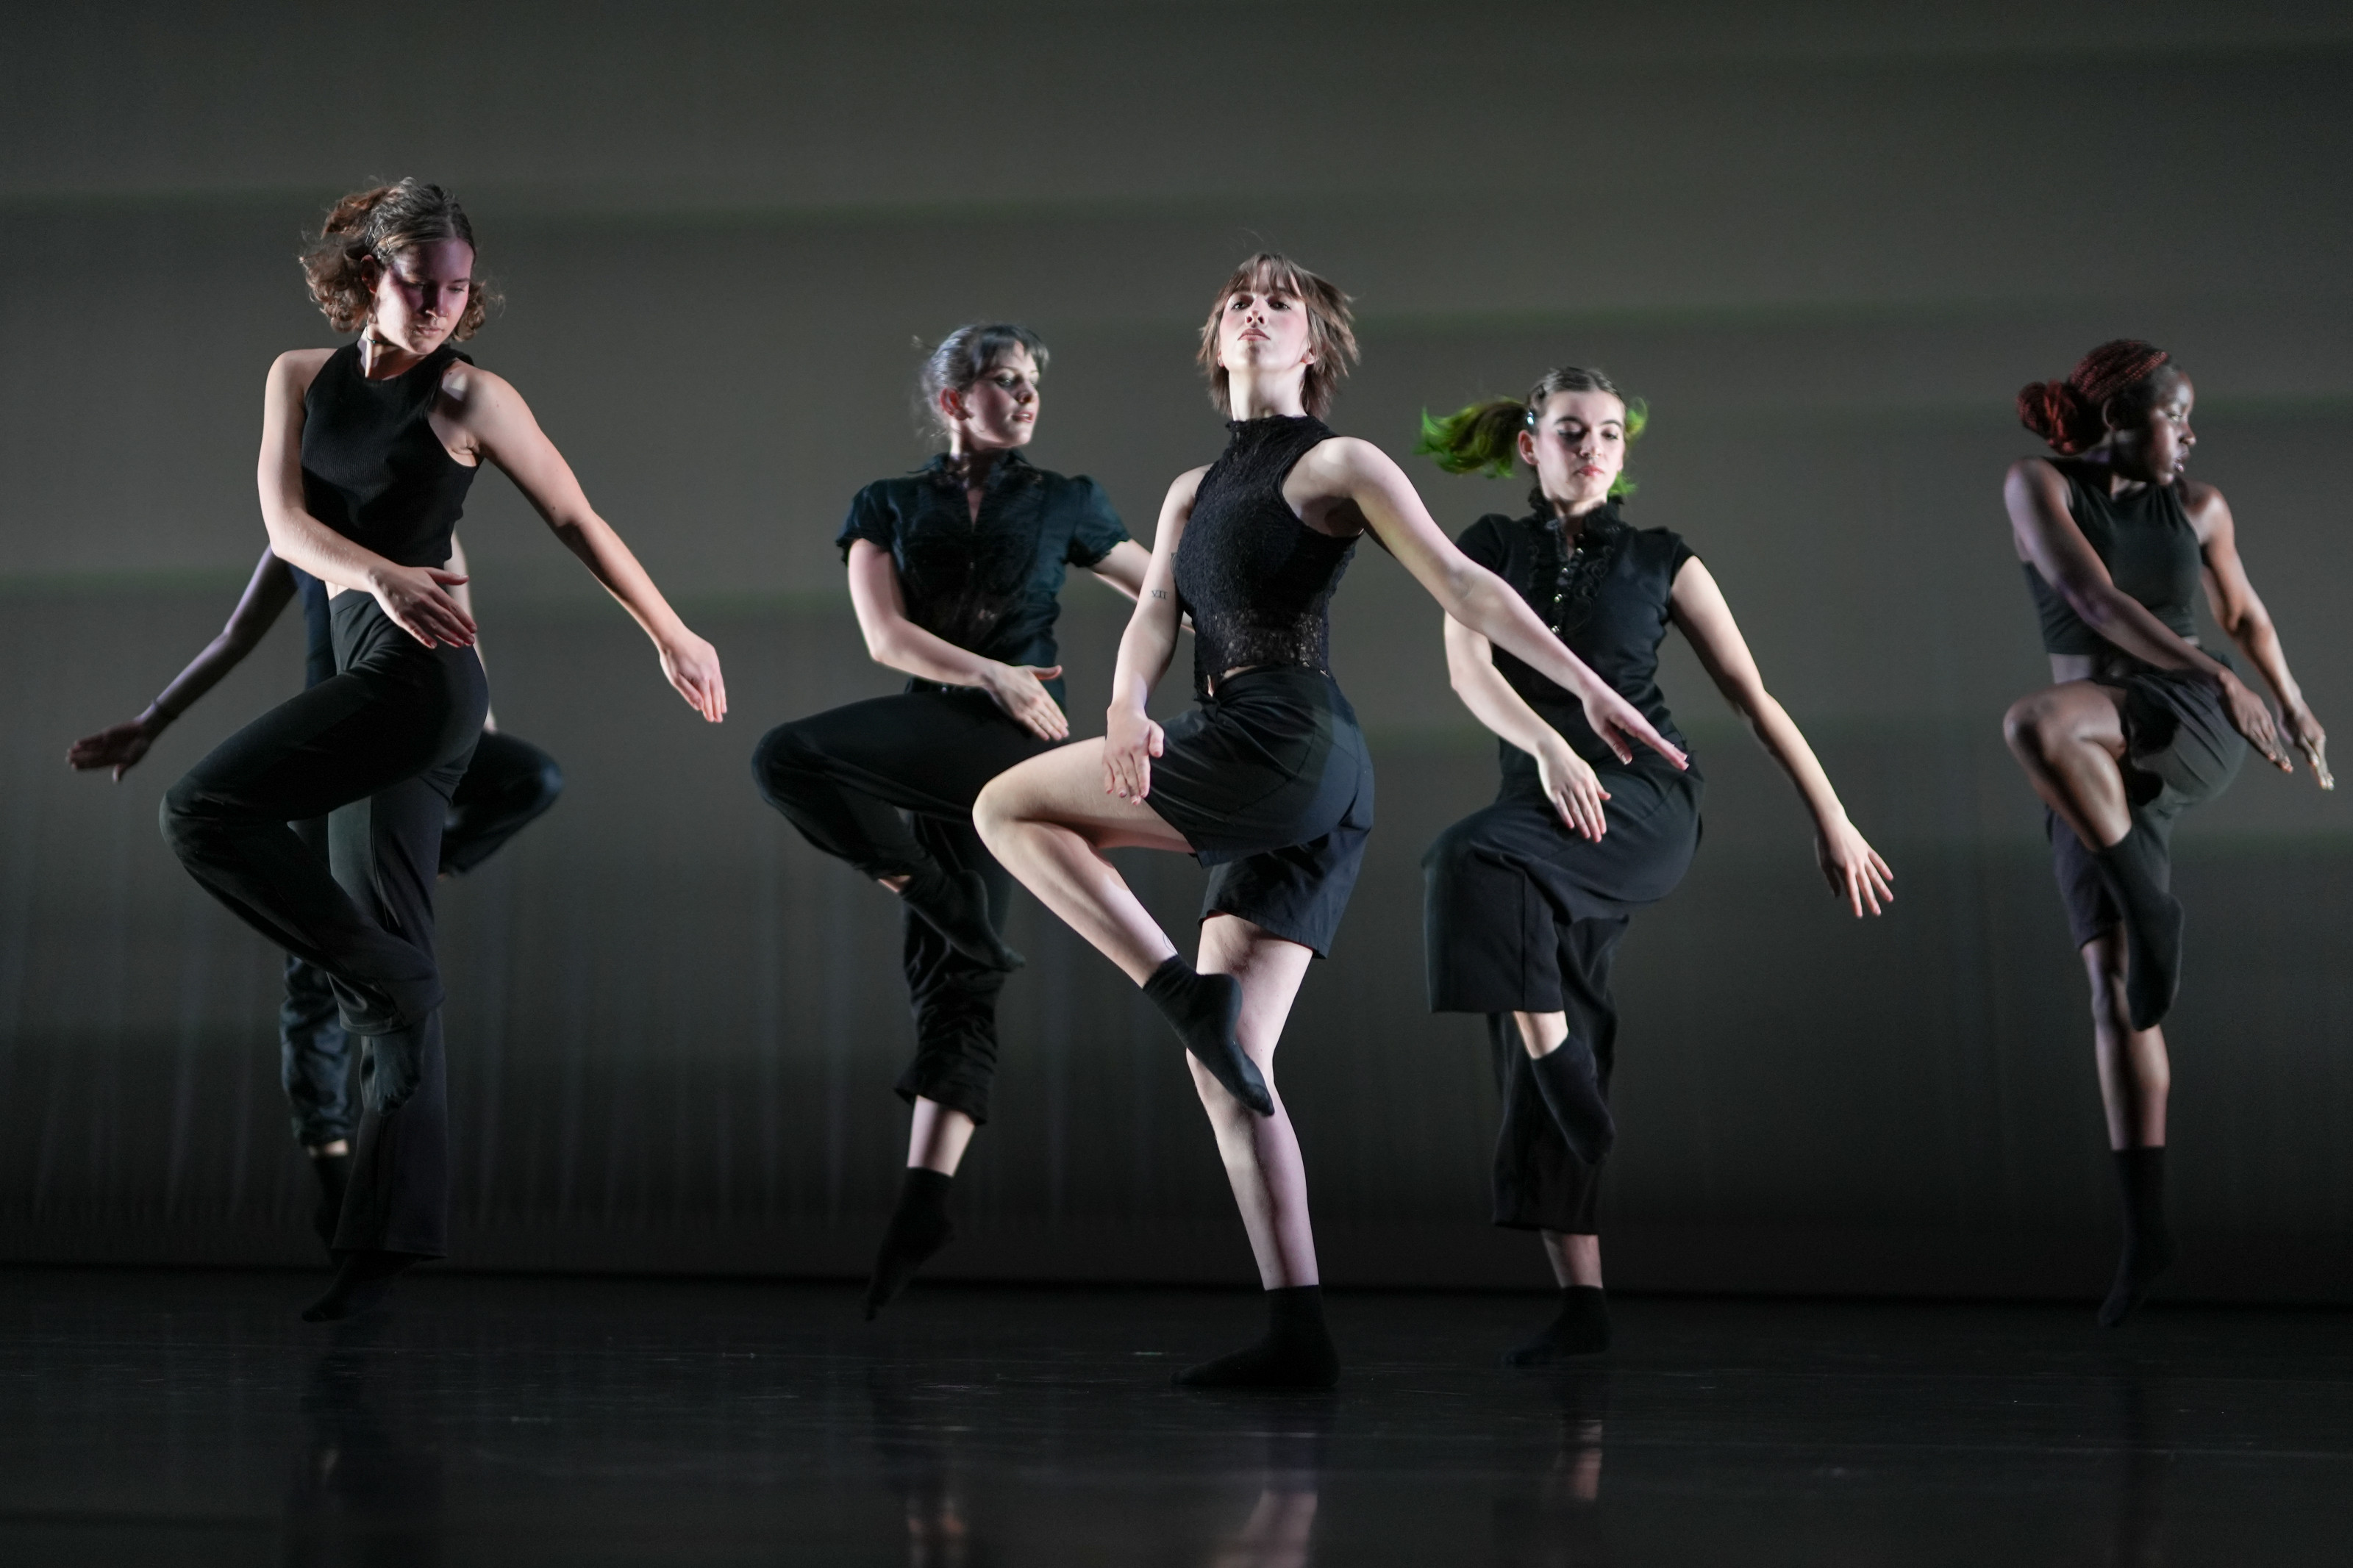 Students dancing against a grey background. They are wearing black clothes and black socks.